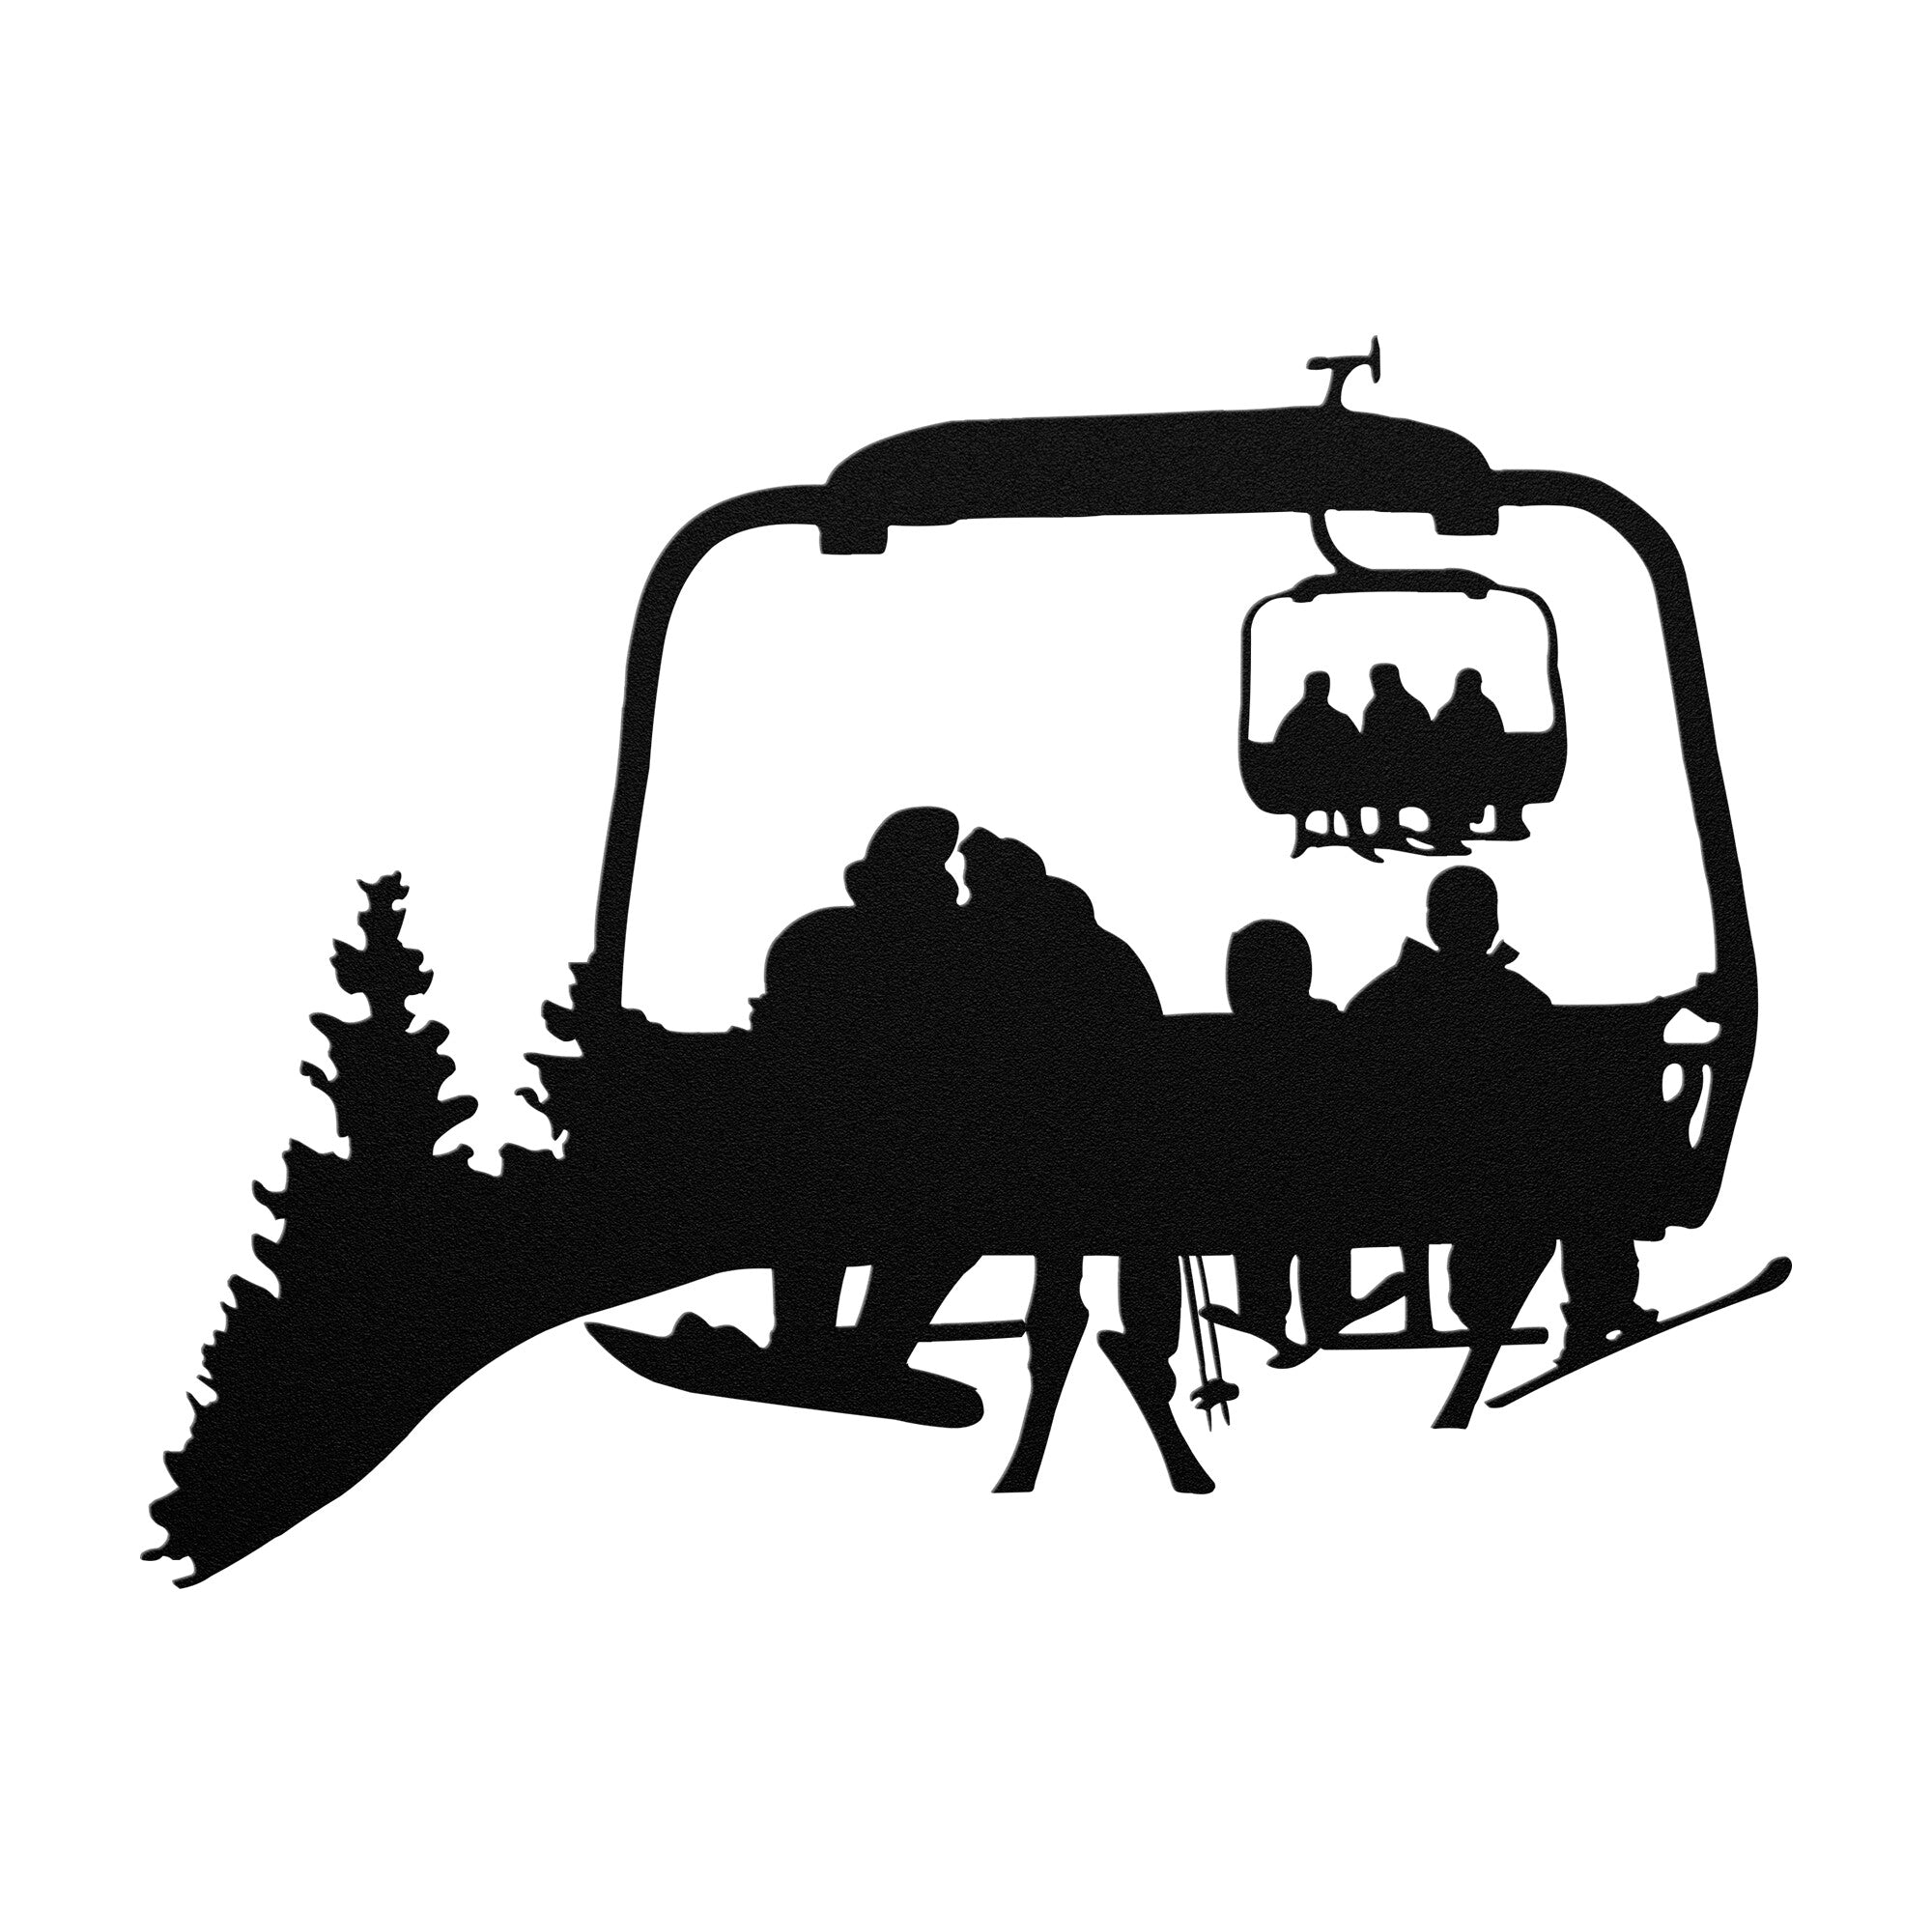 PERSONALIZED CHAIRLIFT SKI & SNOWBOARD FAMILY METAL WALL ART, 1 SNOWBOARDING DAD, 1 SKIING MOM, 2 SKIING CHILDREN (🇺🇸 MADE IN THE USA)